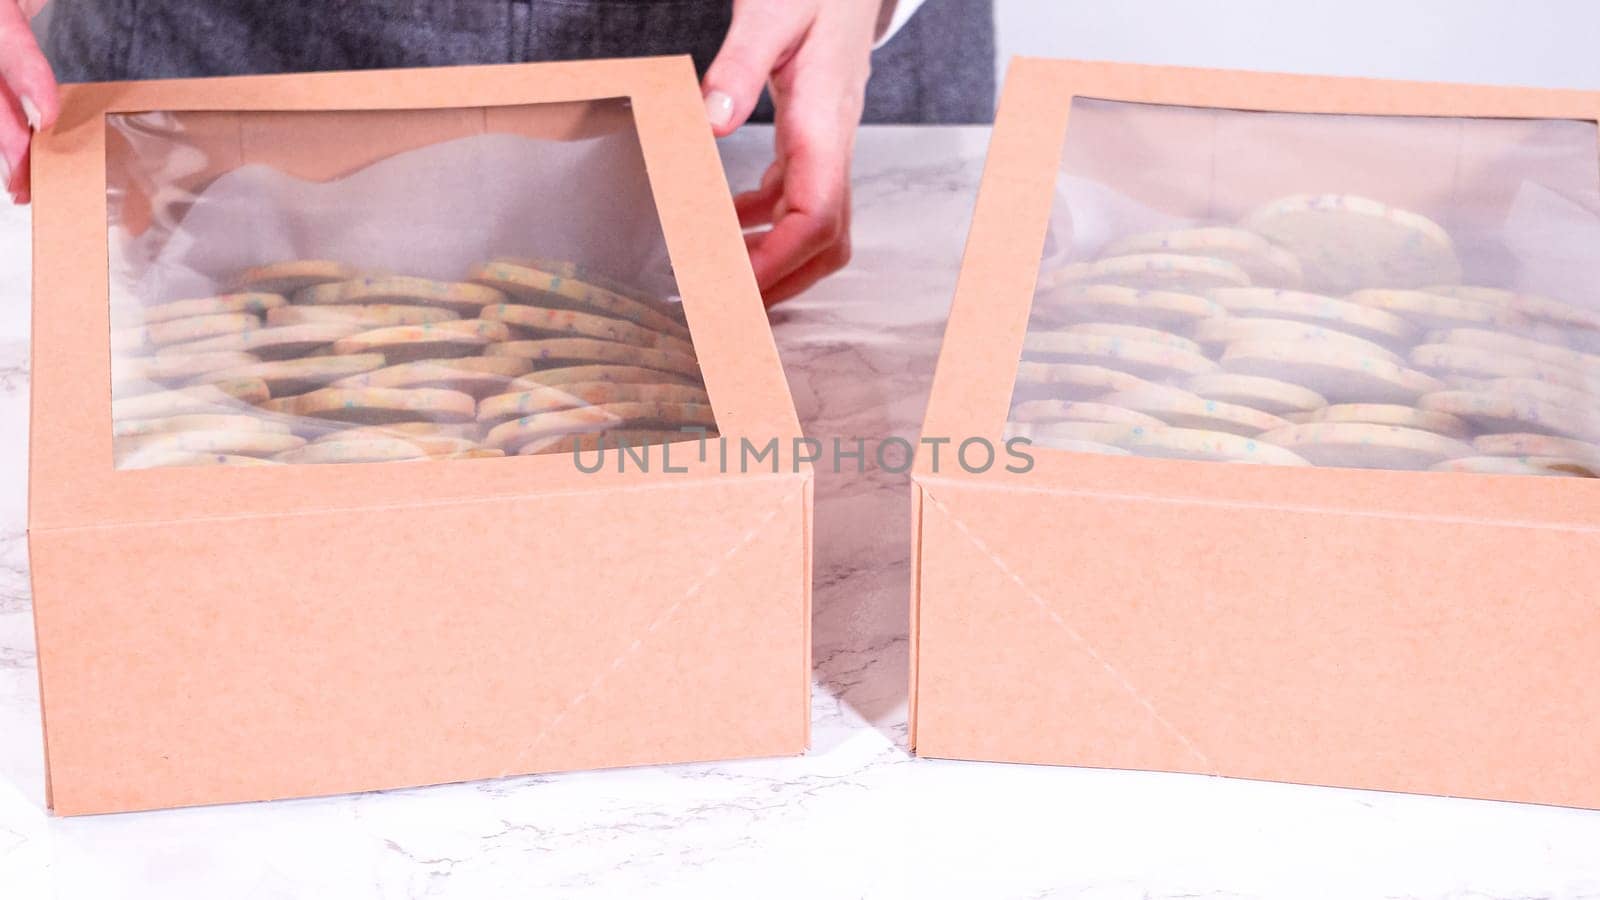 The sugar cookies, filled with sprinkles mixed into the dough, are carefully arranged with meticulous precision into a rustic brown paper box.